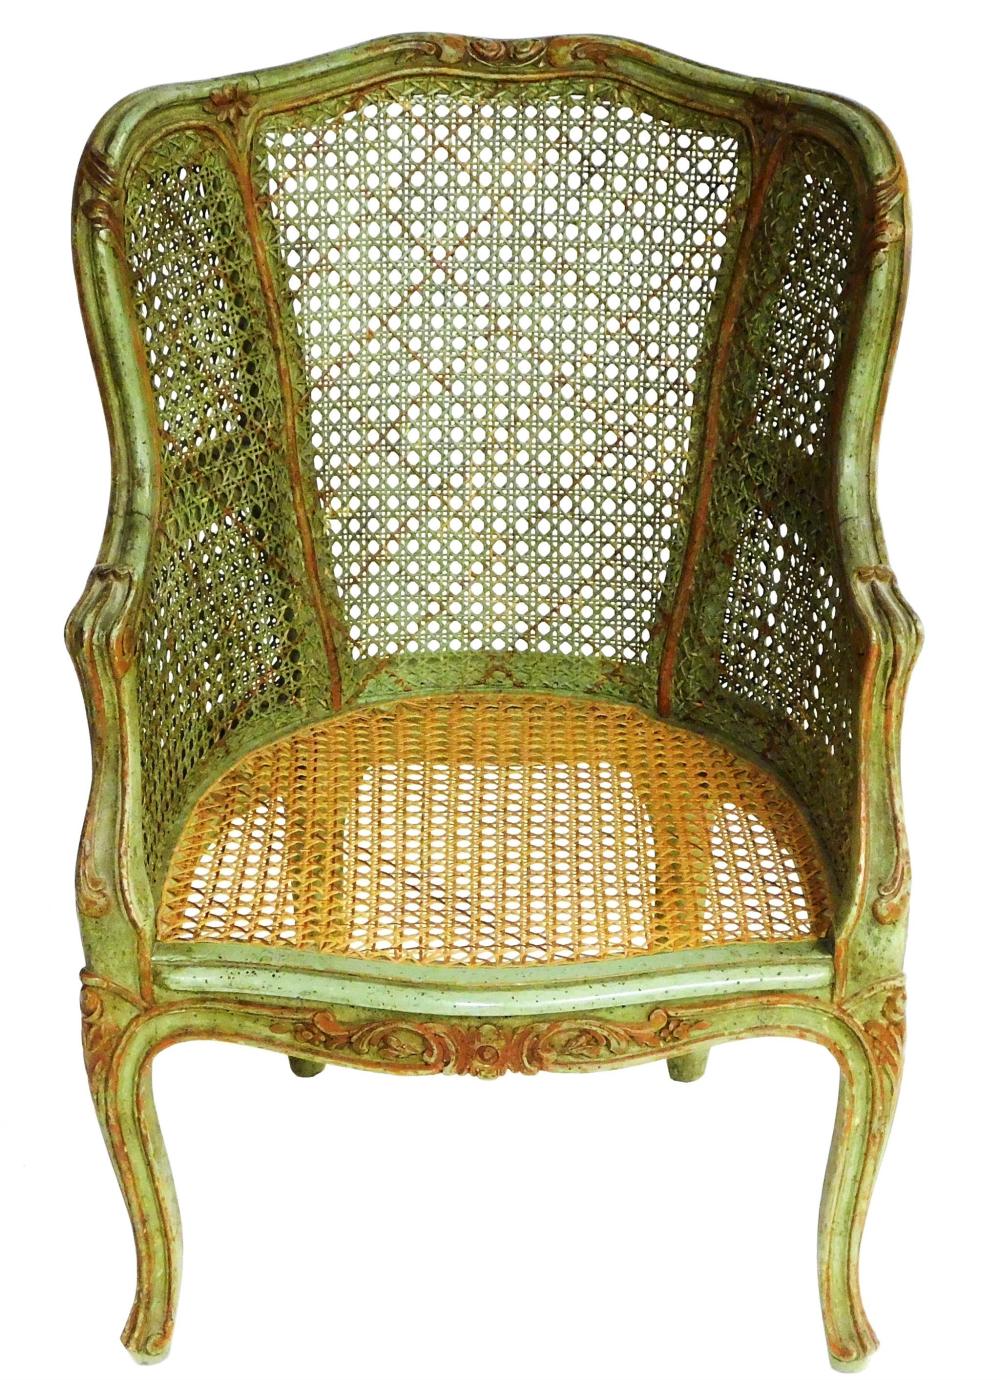 CHILDS FRENCH STYLE CHAIR PAINTED 31e3ad